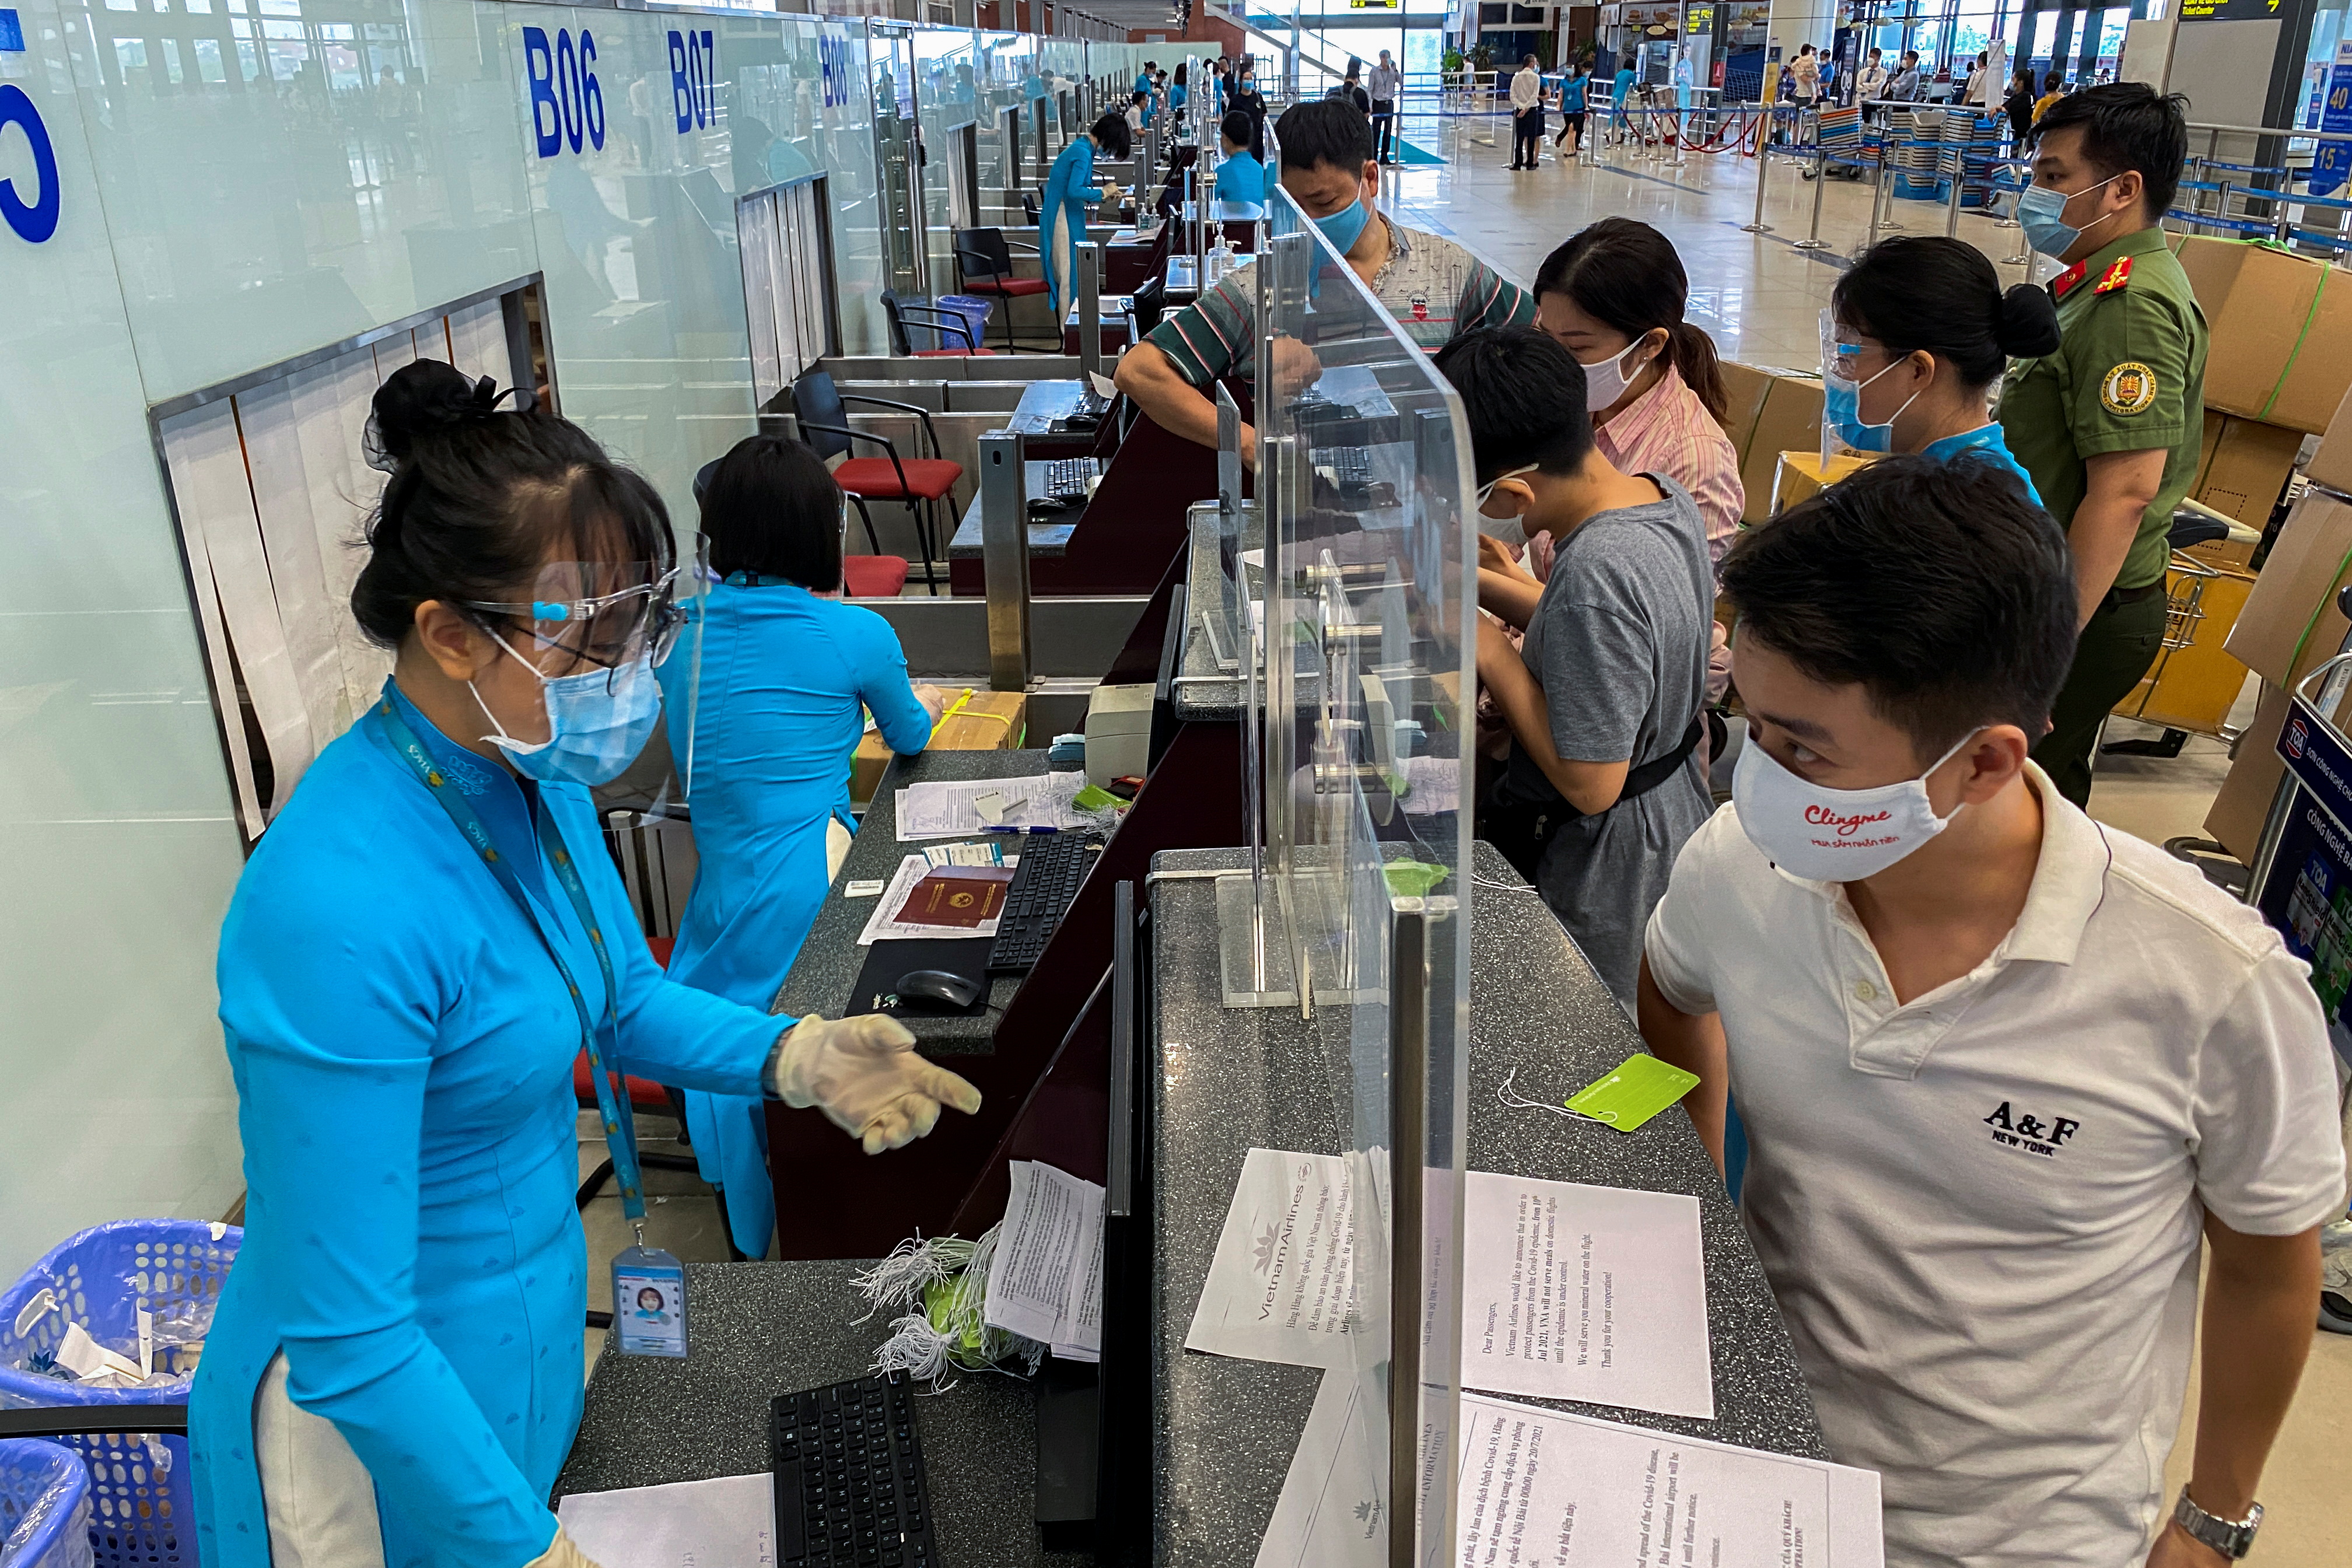 Passengers wearing protective face masks check-in at Noi Bai International Airport, as the Vietnamese government has allowed reopening several domestic air routes amid the coronavirus disease (COVID-19) pandemic, in Hanoi, Vietnam, October 10, 2021. Picture taken October 10, 2021. REUTERS/Nguyen Thinh Tien/File Photo